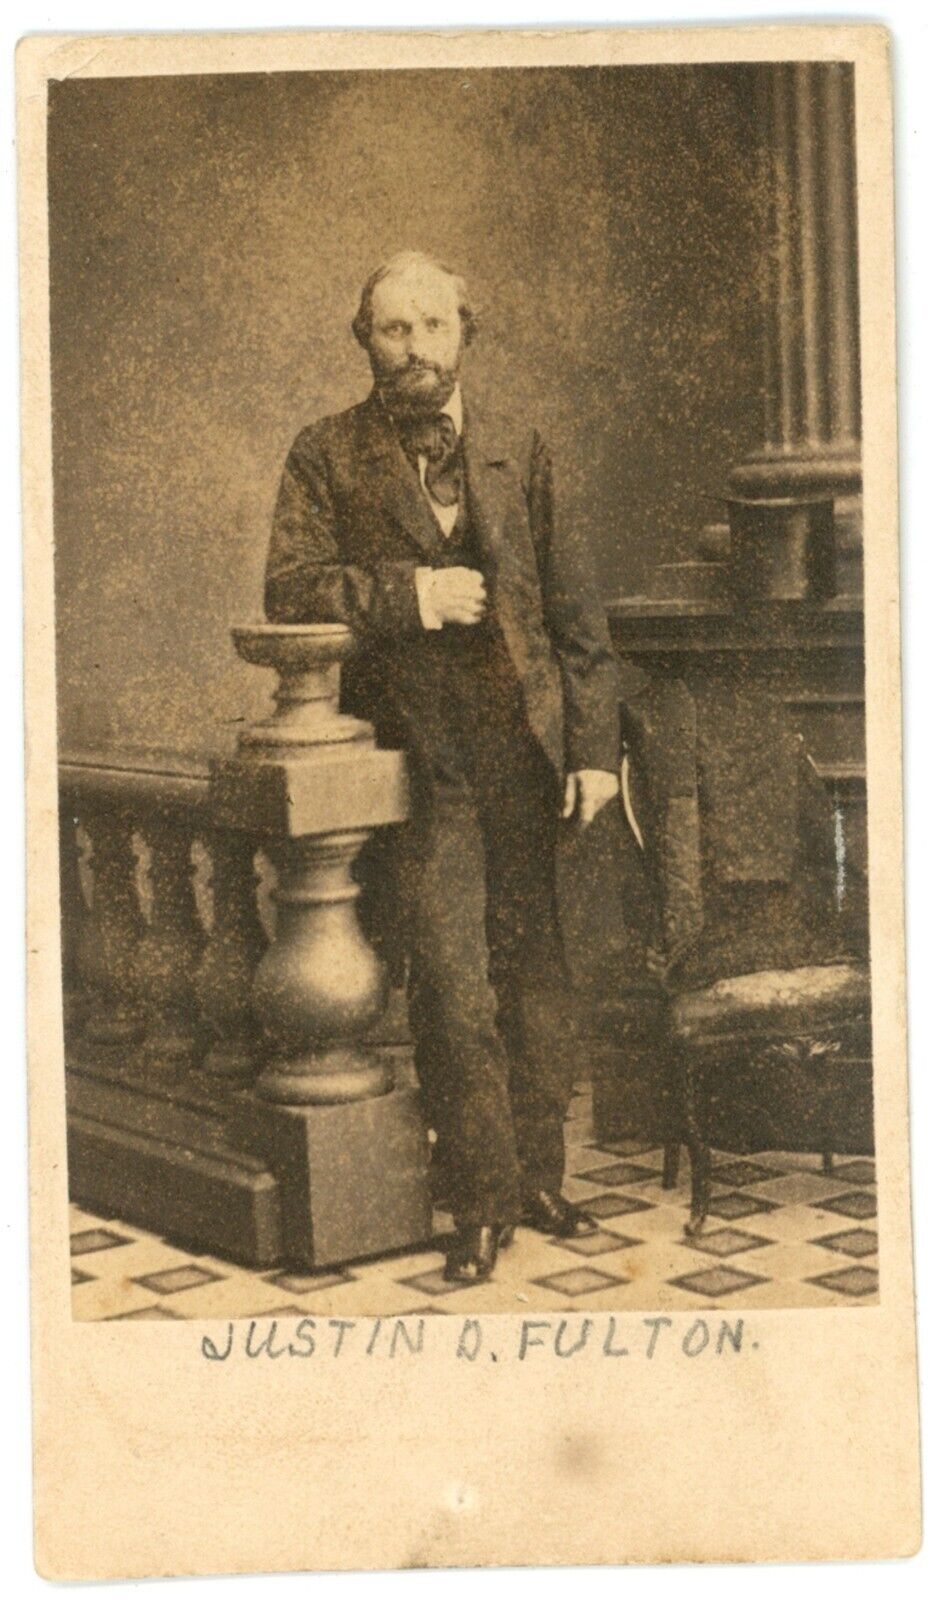 CIRCA 1870'S VERY RARE CDV Featuring Famous American Author: Justin D. Fulton